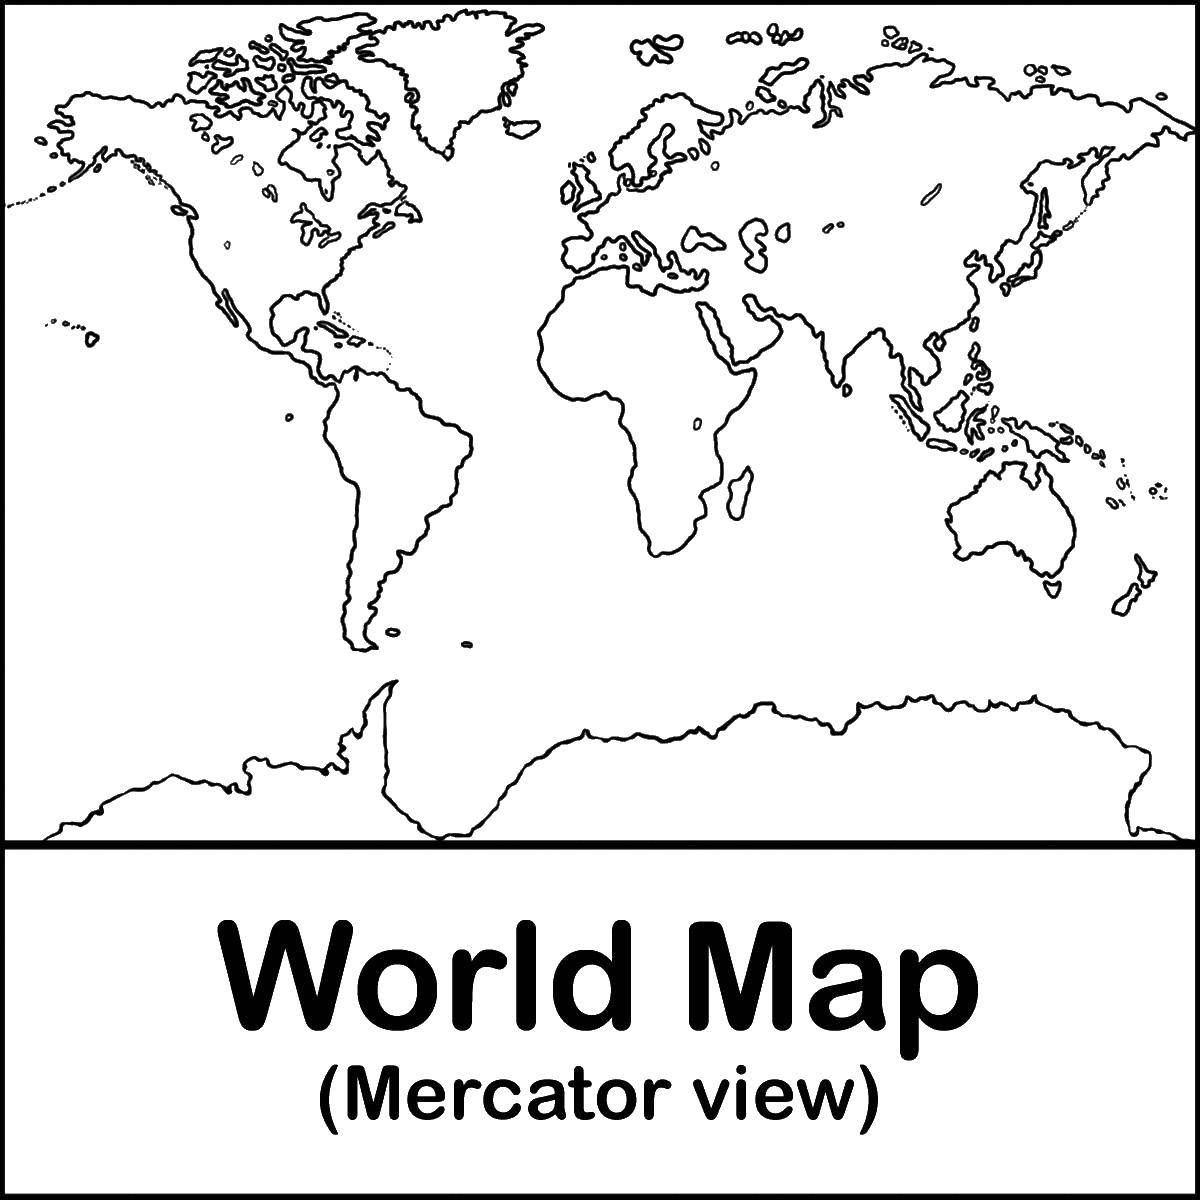 Coloring World map. Category Maps. Tags:  Map, world.